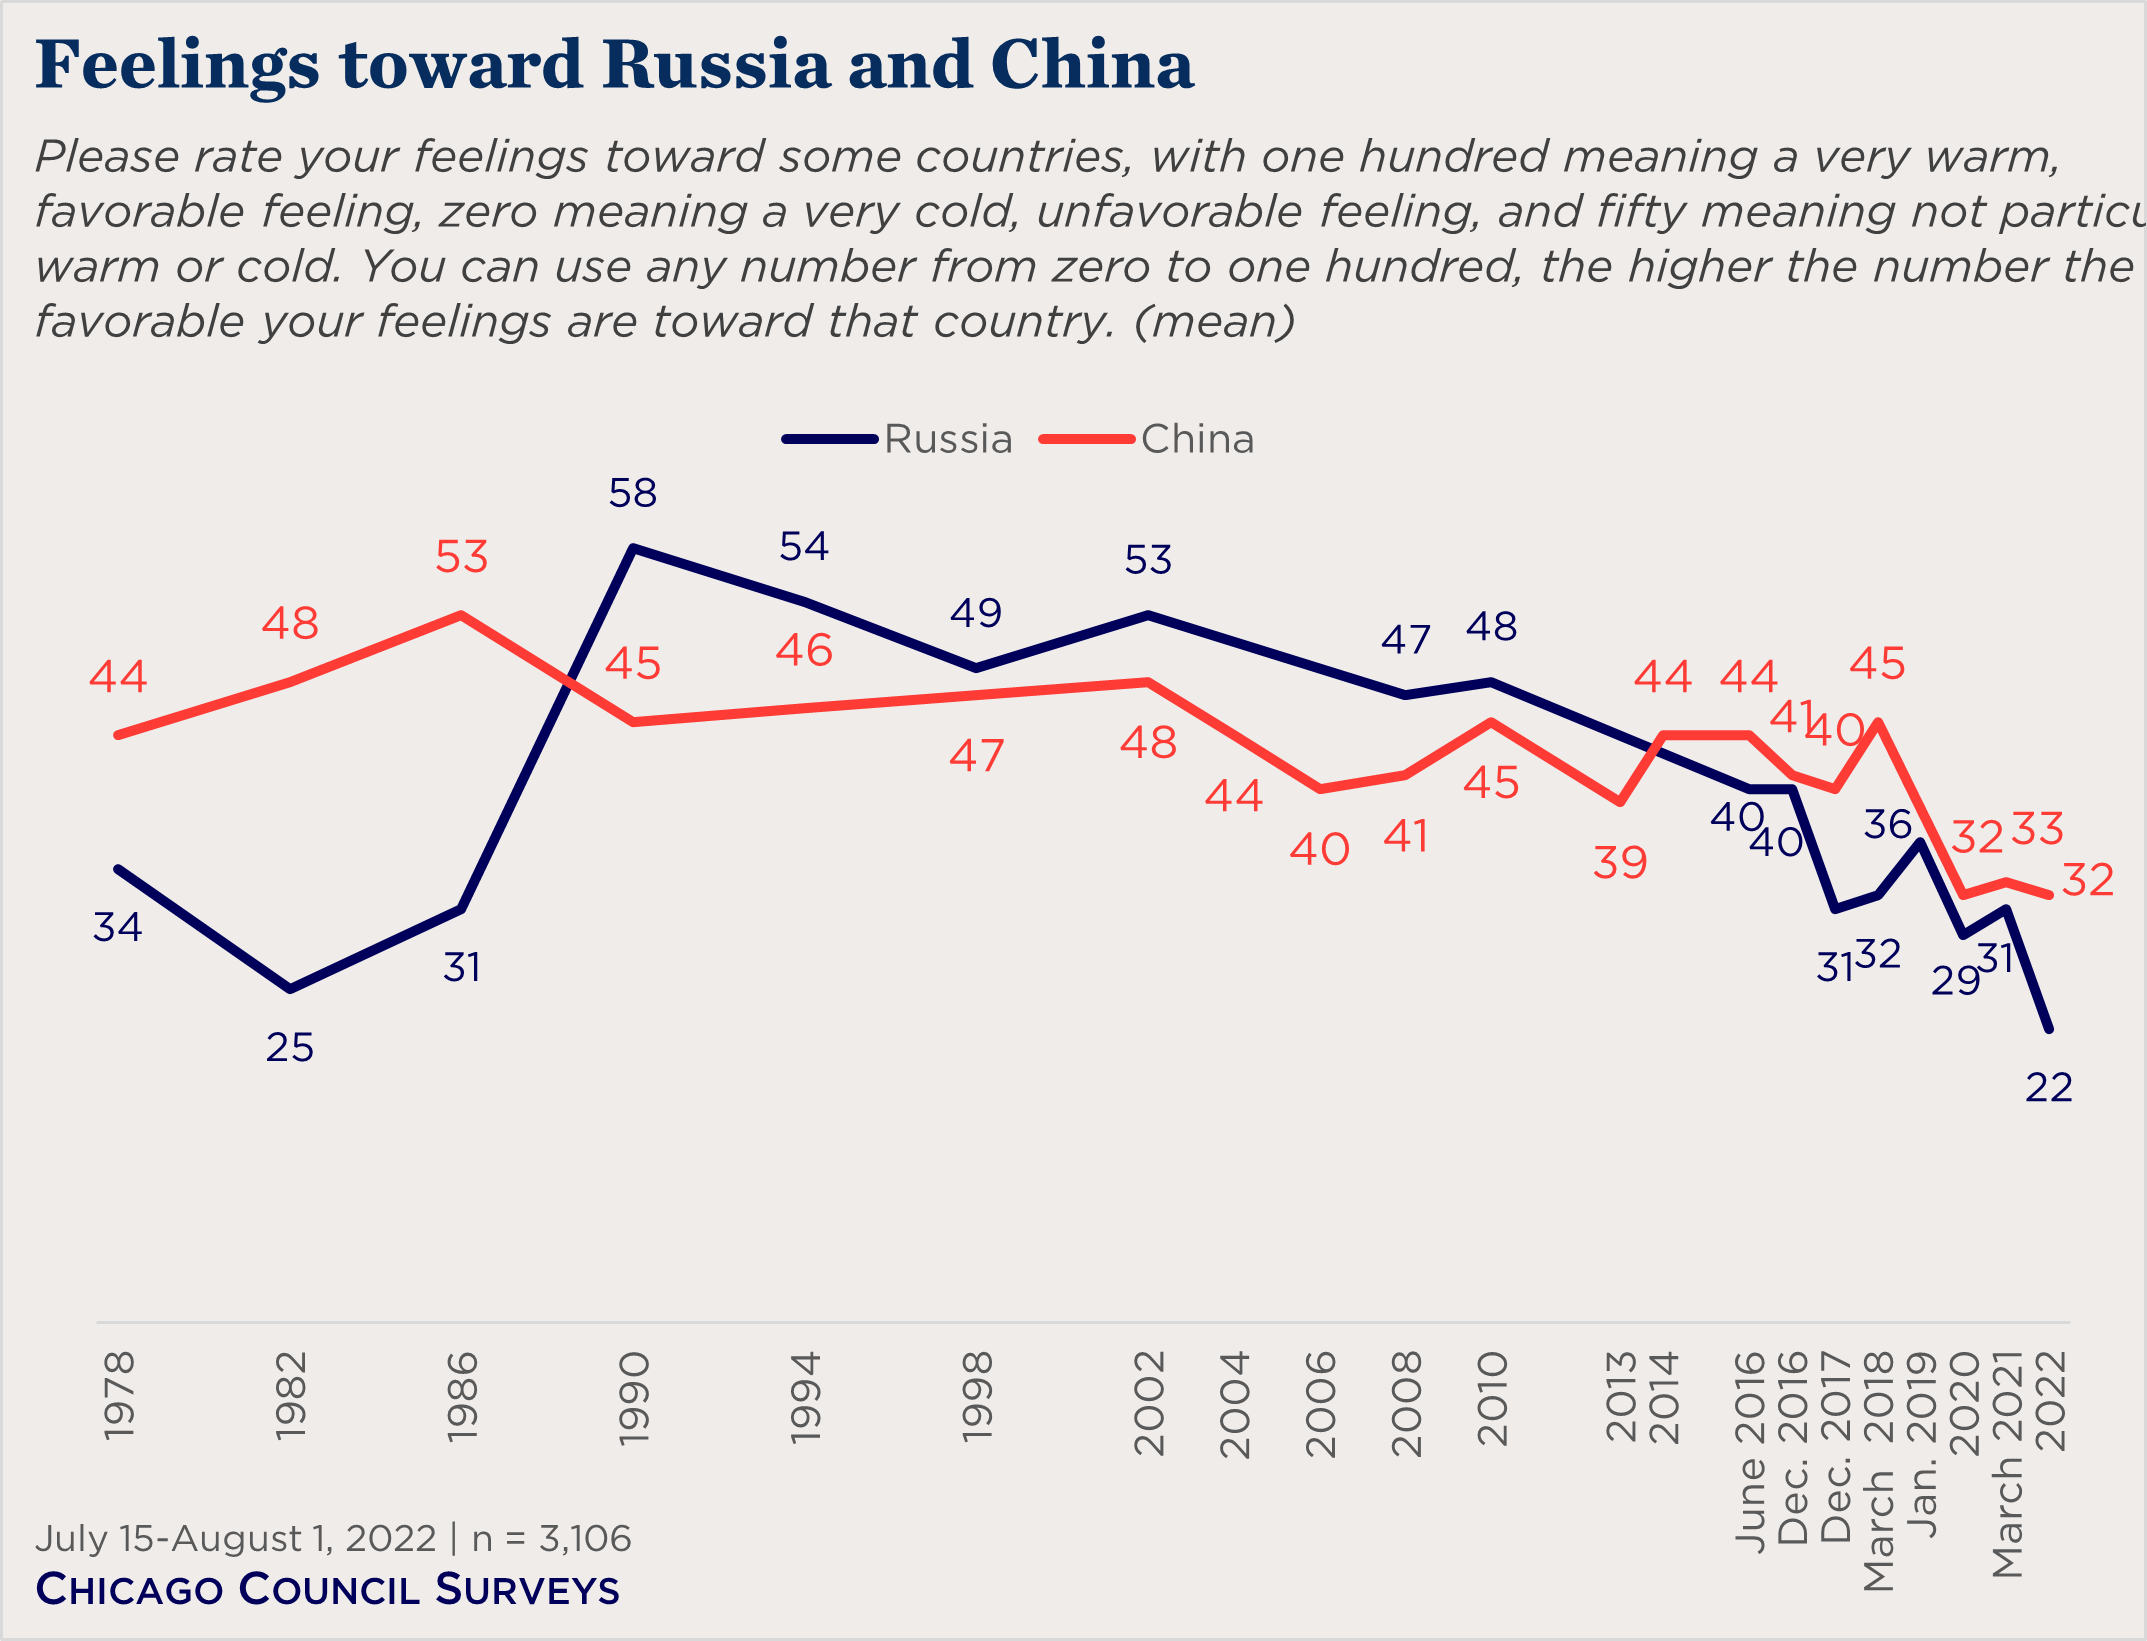 "line chart showing American feelings toward Russia and China over time"